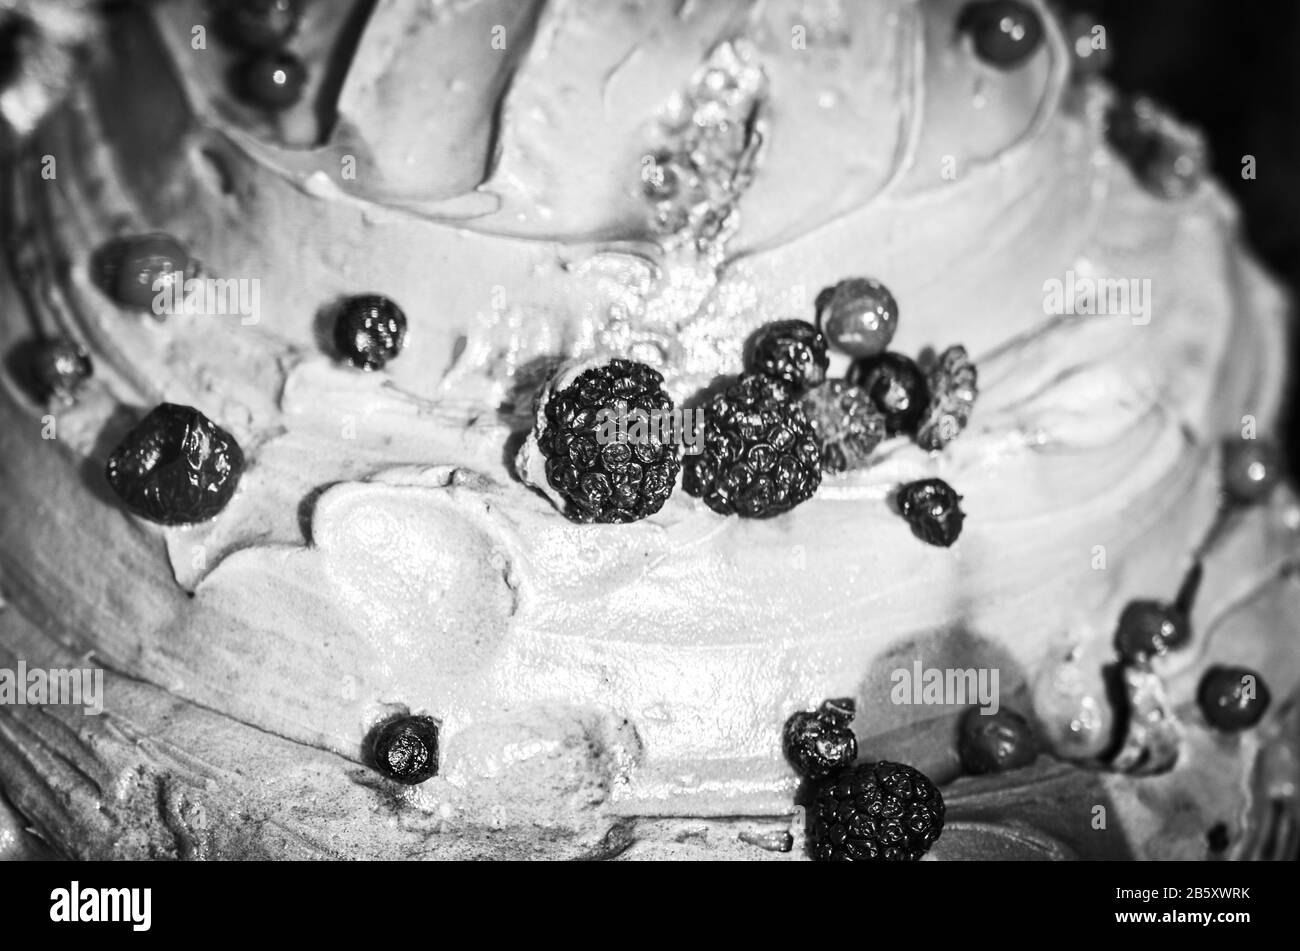 delicious italian ice cream with fresh fruits, nuts & topping Stock Photo